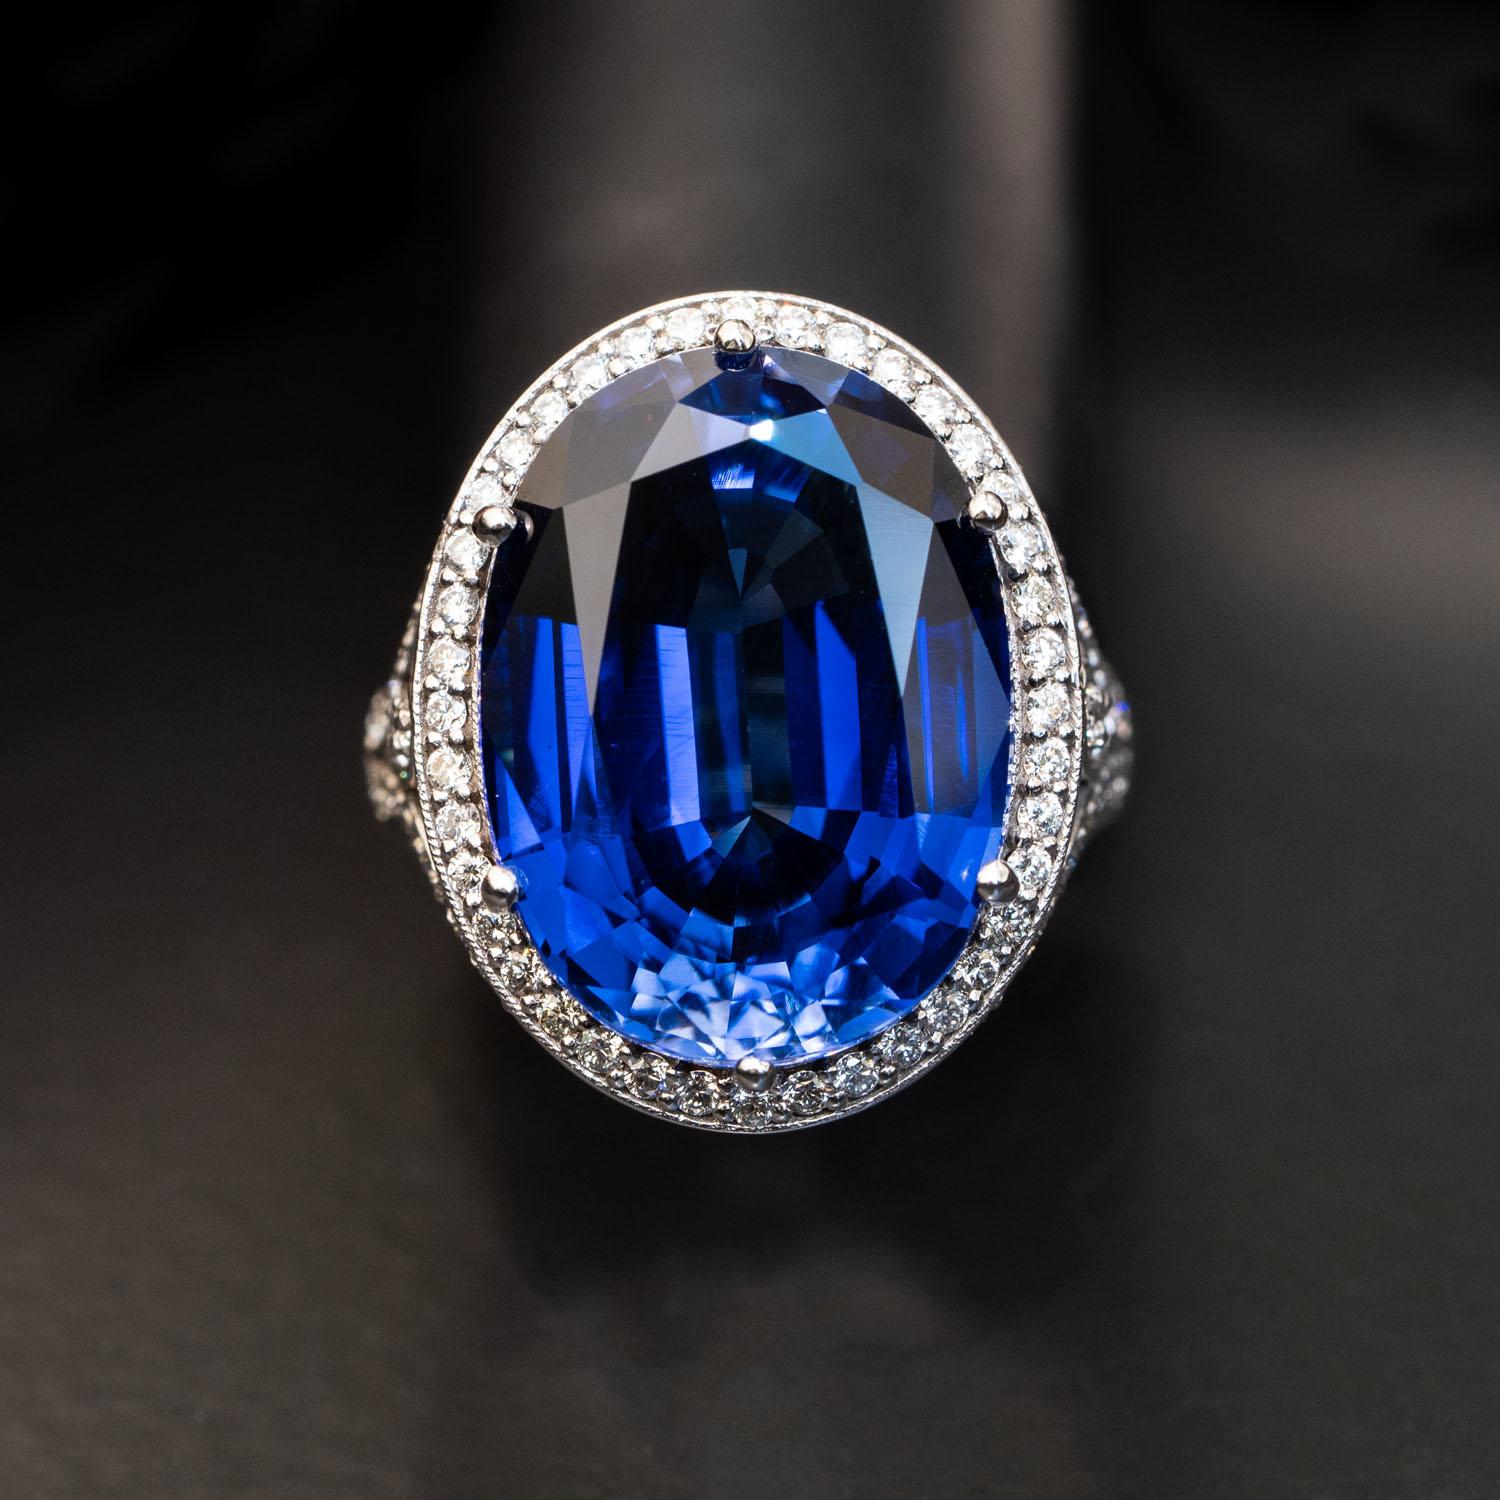 This gorgeous sapphire ring’s center gemstone may command attention initially, but it’s the regal details along the edges and shank that invite the eyes to linger.

The 26 carat deep blue sapphire in the heart of the design is ringed with a delicate